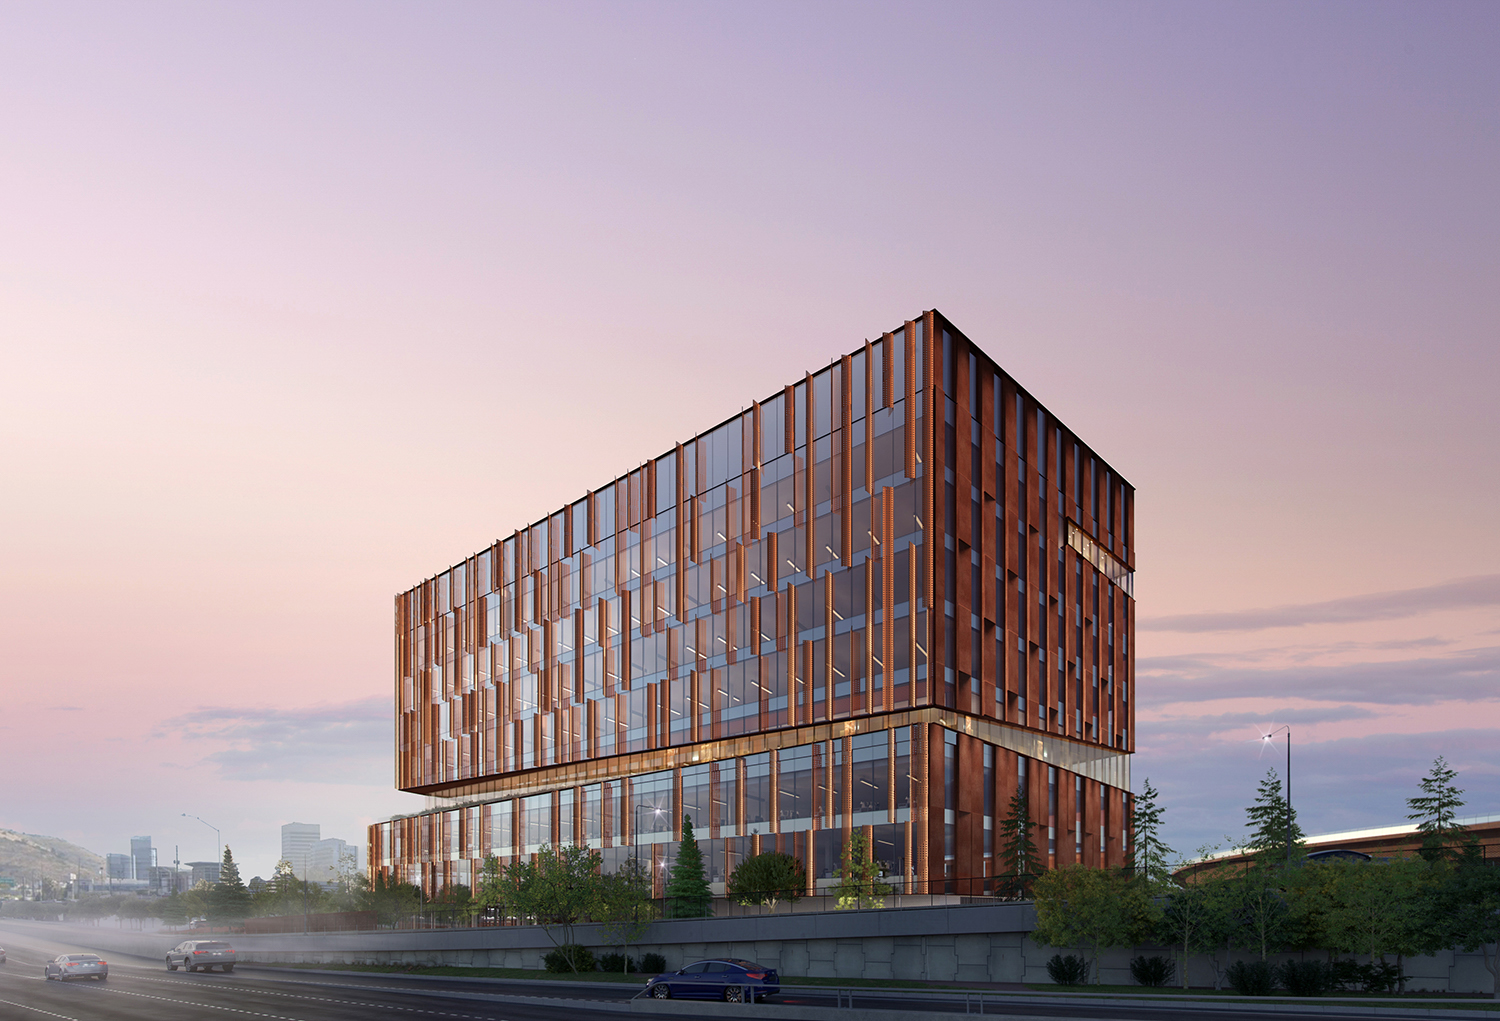 580 Dubuque Avenue, rendering by DES Architects + Engineers, courtesy IQHQ